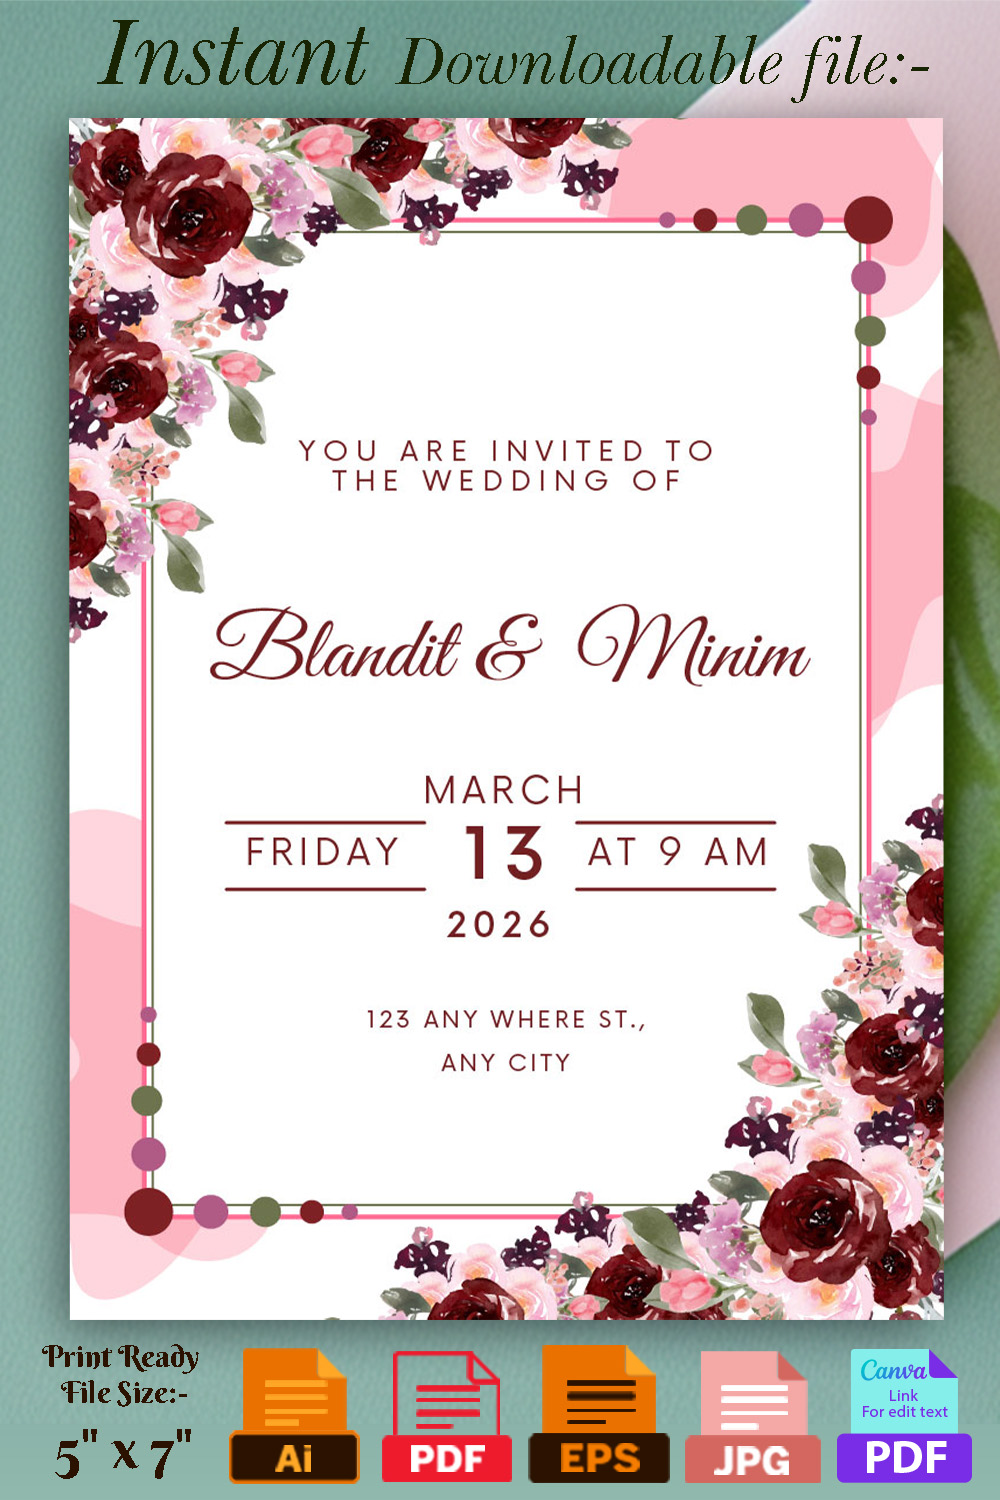 Image of a beautiful pink wedding invitation with flowers.